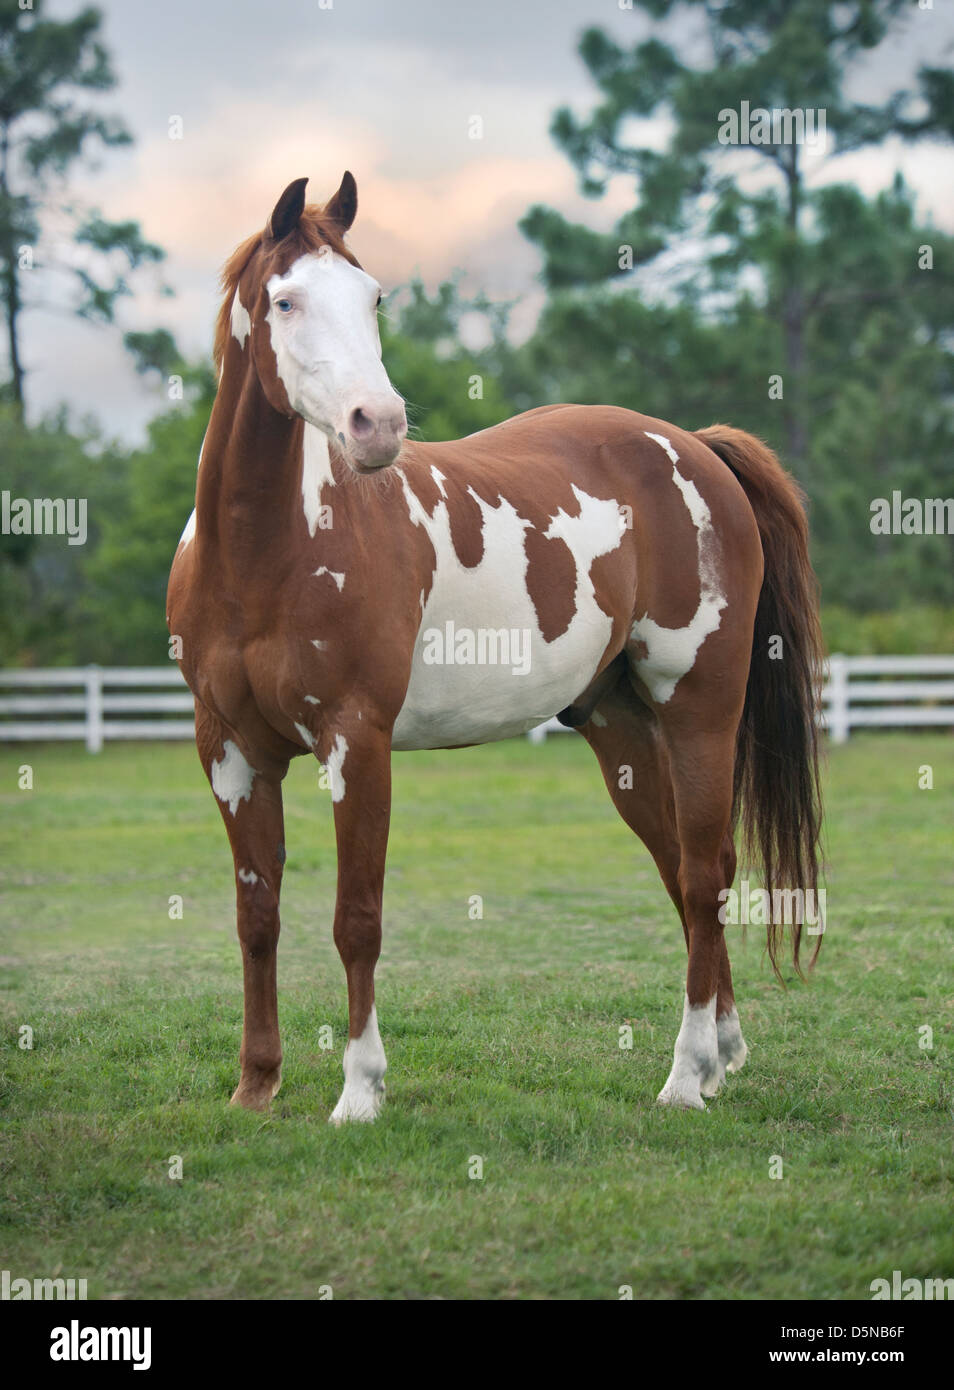 American Paint Horse stallion standing in paddock at dusk Stock Photo